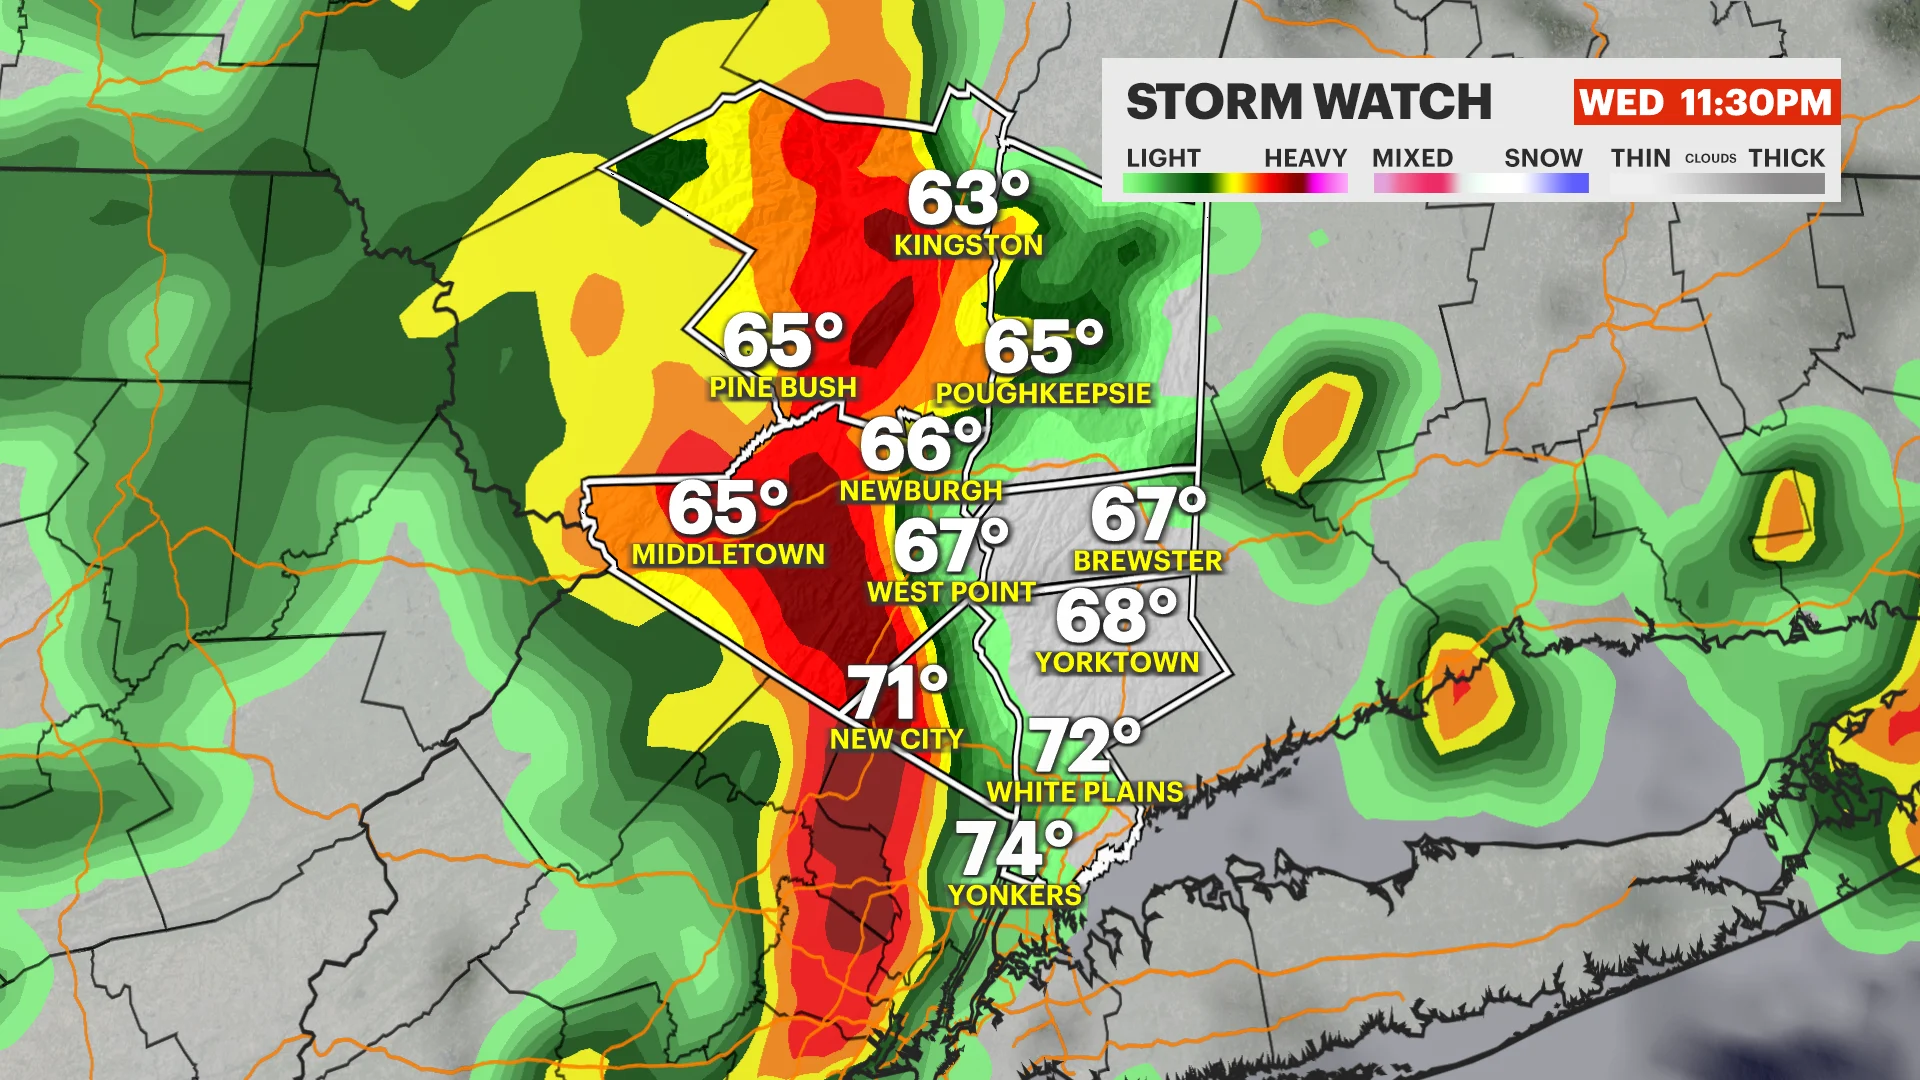 STORM WATCH: Thunderstorms could bring strong winds, heavy rain and hail to the Hudson Valley this evening 